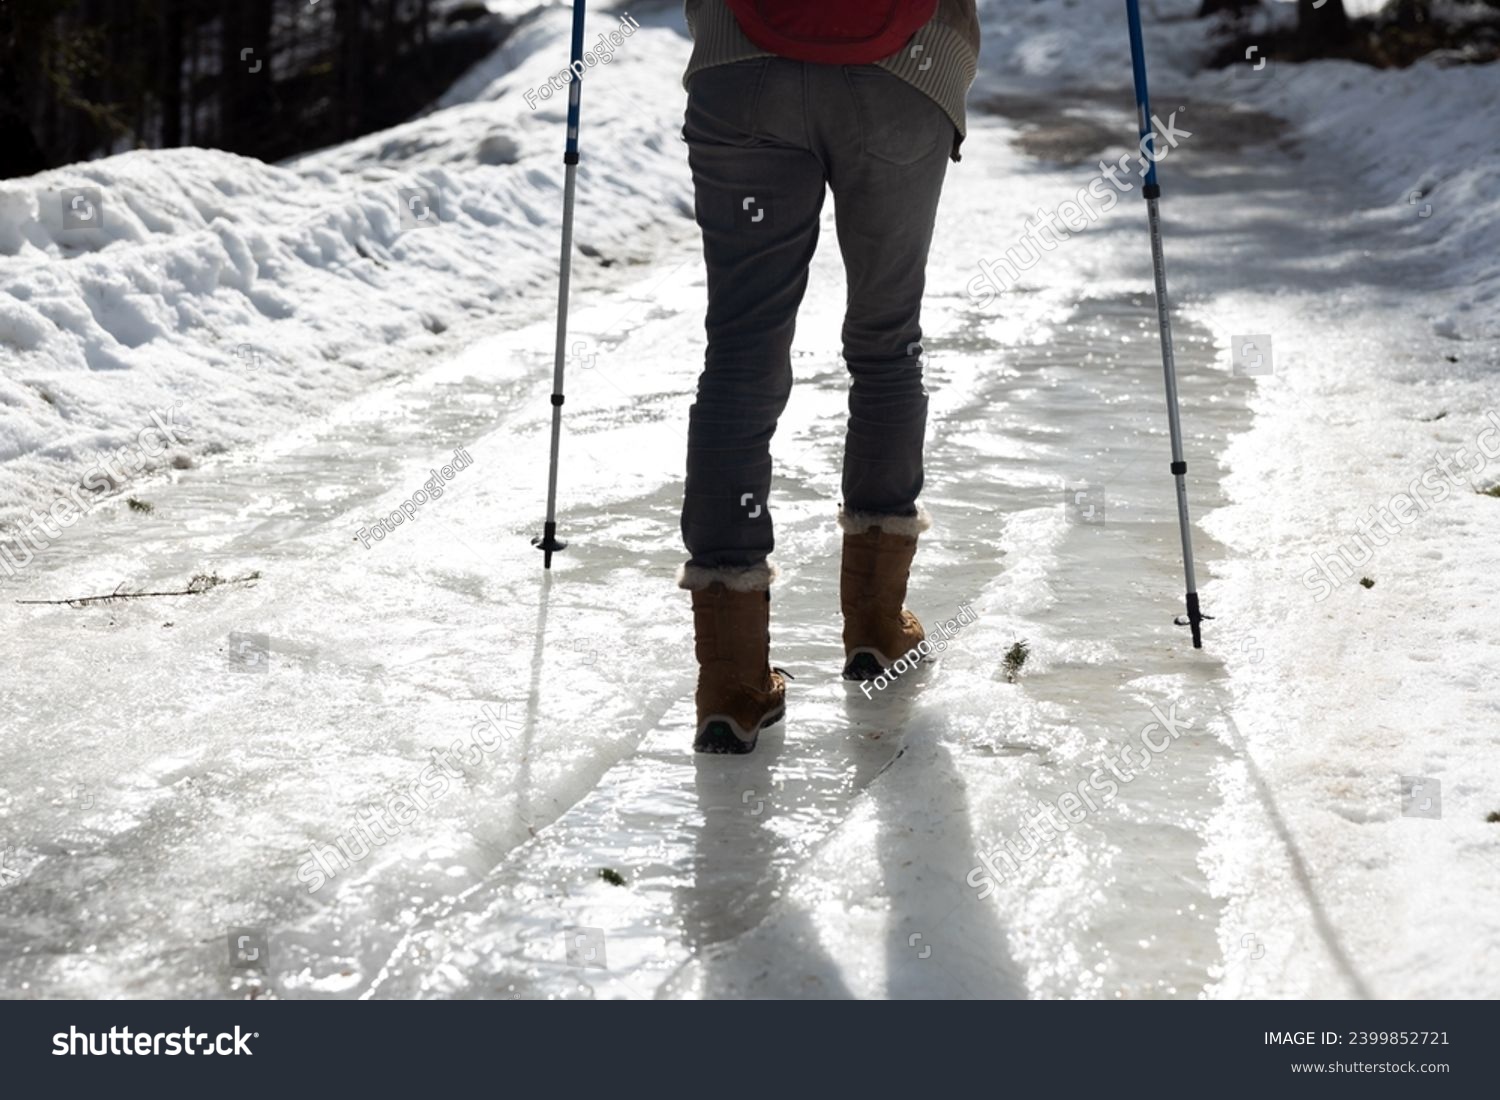 Woman Hiker Walking Carefully over part of Frozen Icy Road in Winter in Snowshoes and with help of Hiking Poles #2399852721